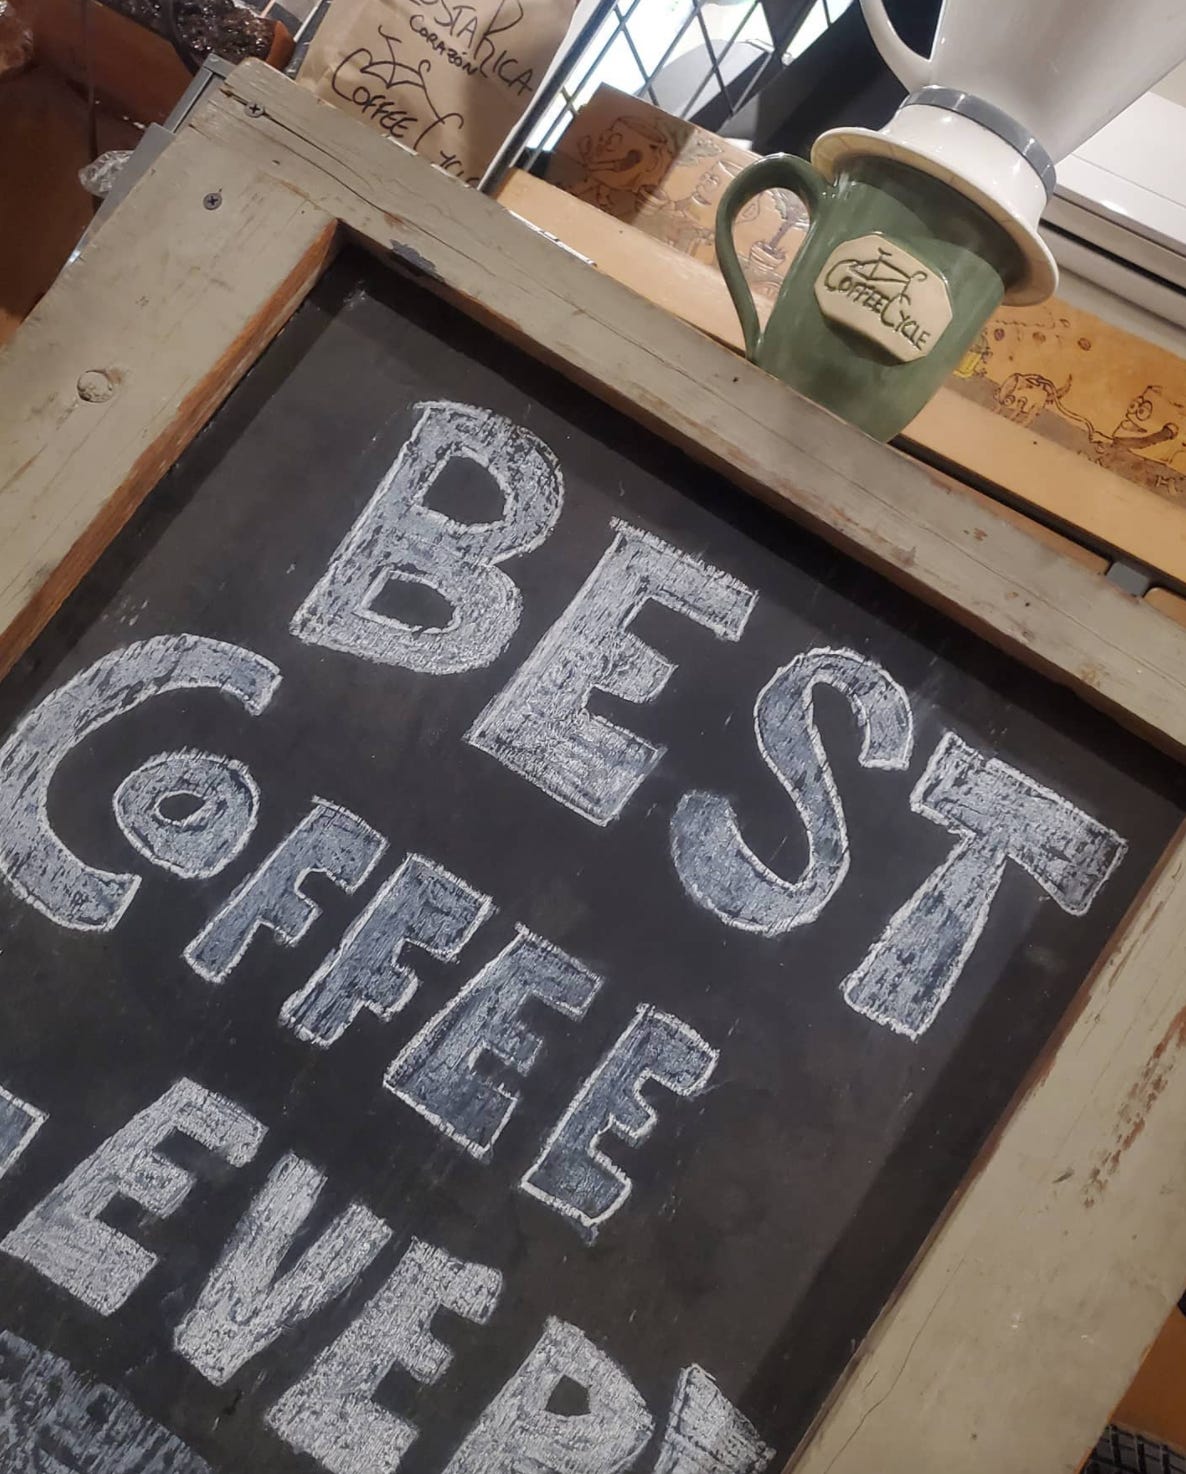 A close-up on the hand made wood a-frame chalkboard sign that sits in front of Coffee Cycle cafe. White chalk letters say "Best Coffee Ever!" A Coffee Cycle mug sits on top. The frame is made from upcycled pallet wood and painted light grey.